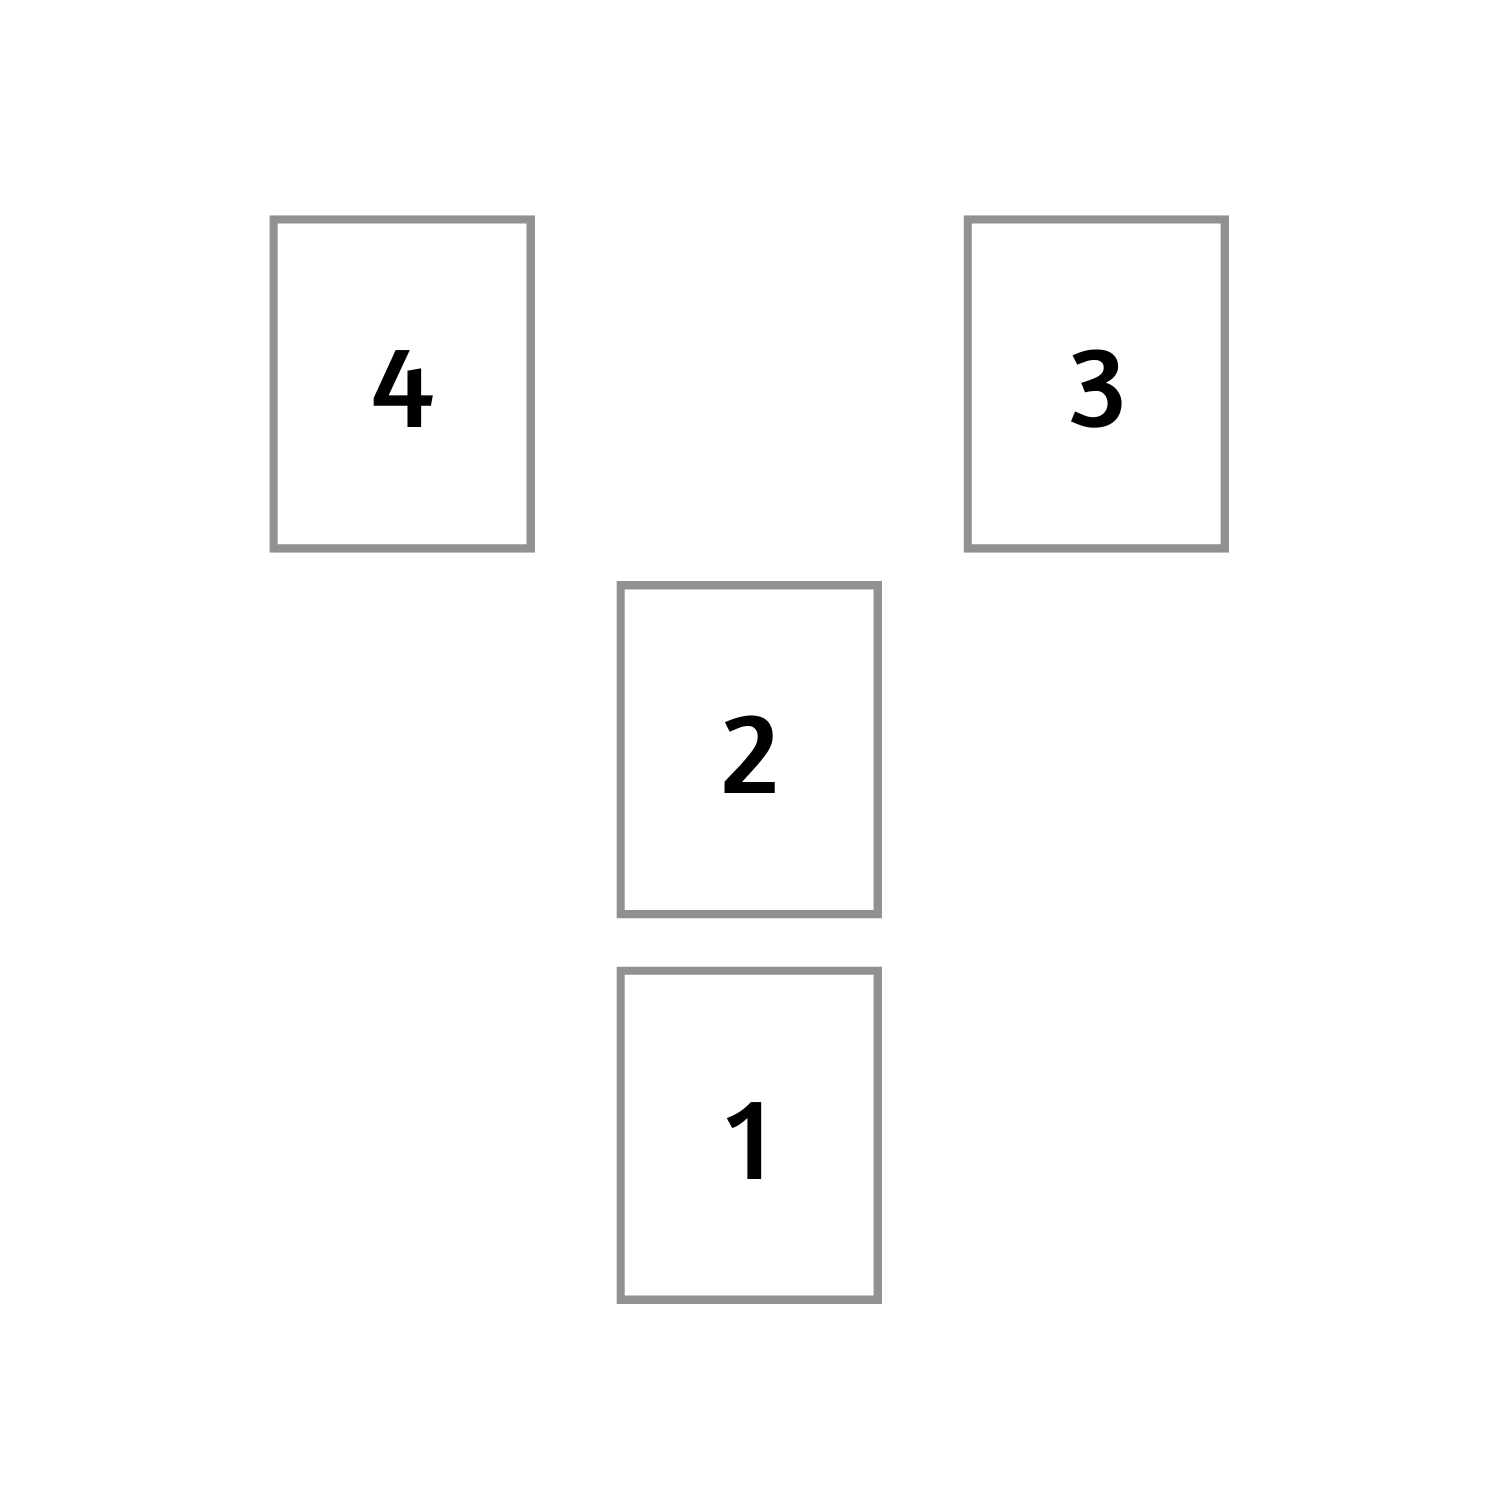 Image description: four rectangles representing tarot cards in a layout. The first card starts at the bottom, the second directly above that. The third card is just above the second card, but off to the right; and the fourth is just above the second card, but off to the left.